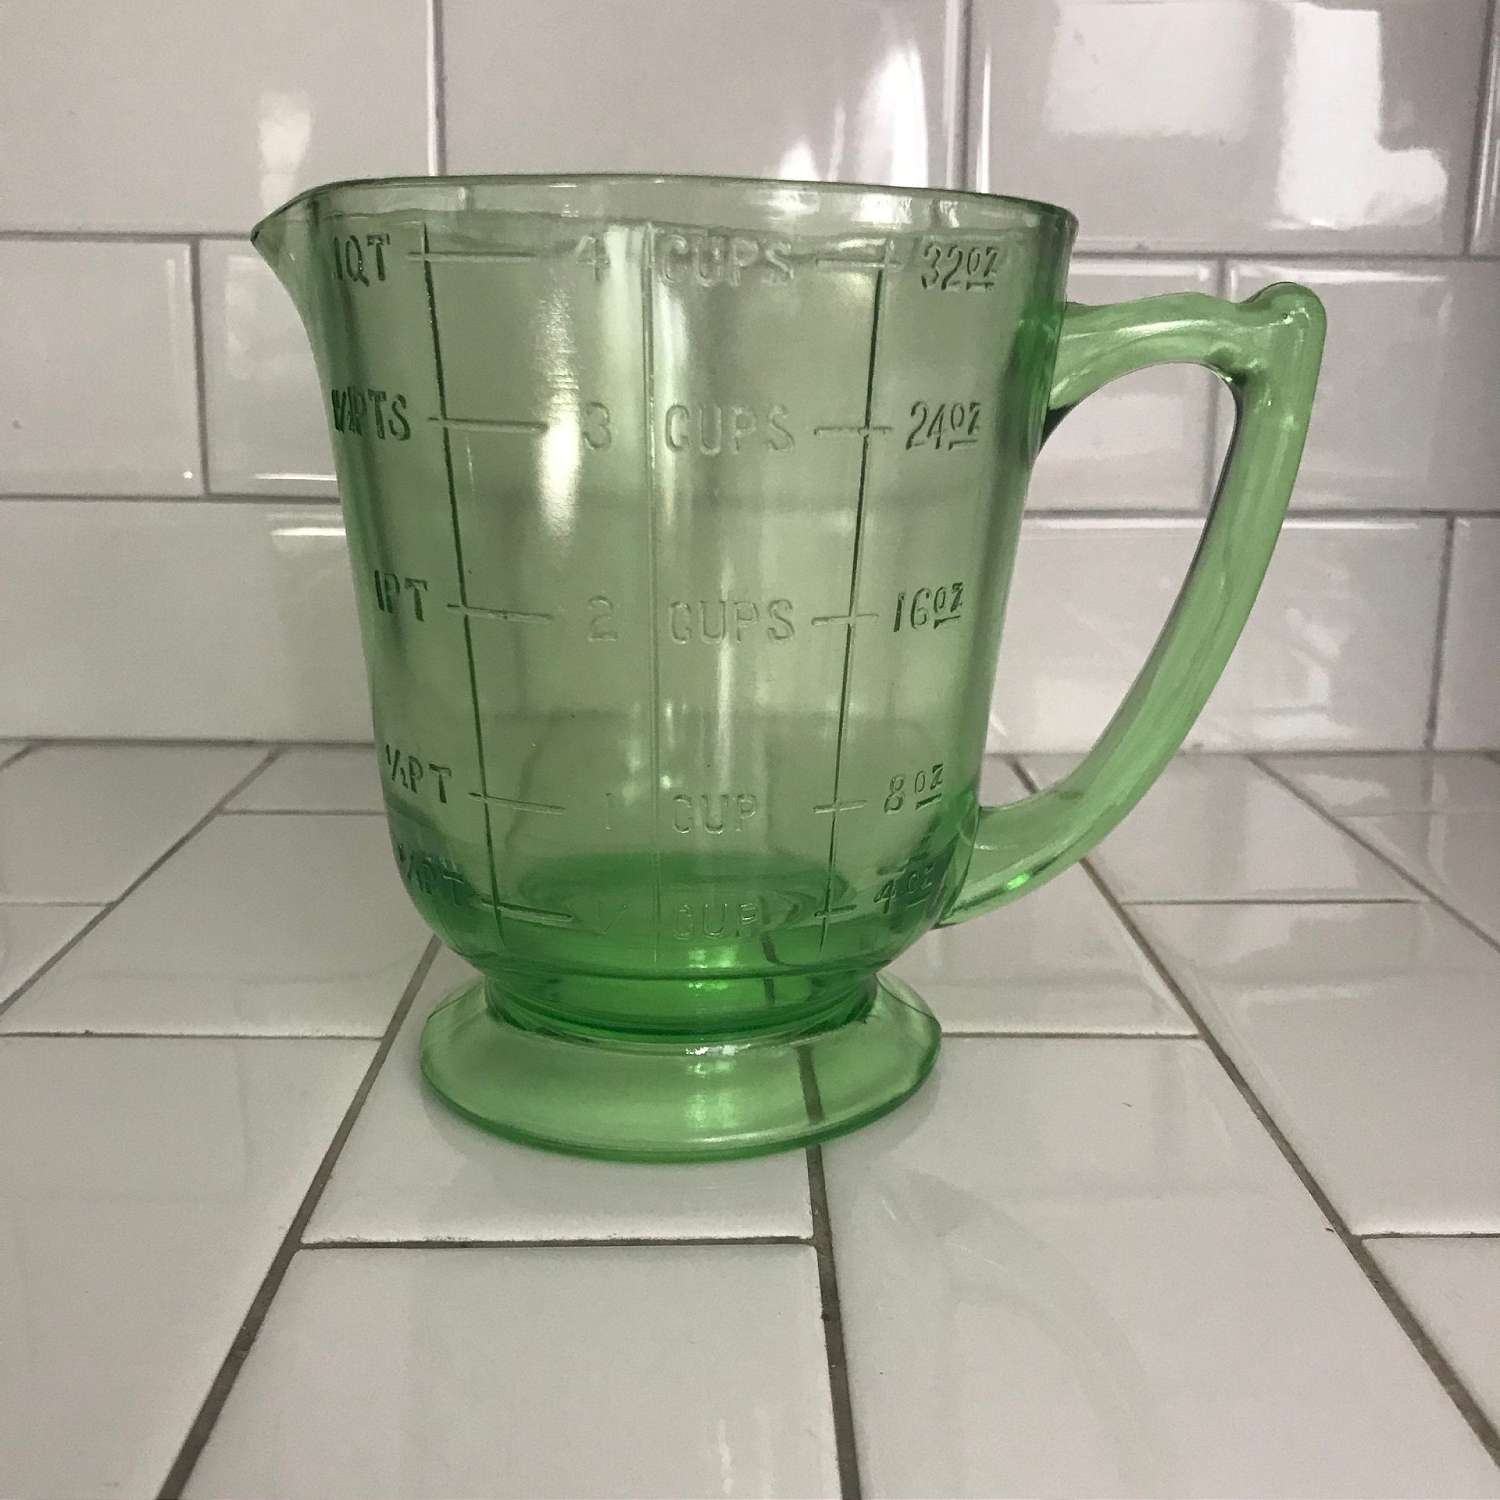 https://www.truevintageantiques.com/wp-content/uploads/2019/12/antique-uranium-glass-measuring-cup-4-cups-green-kitchen-collectible-display-farmhouse-glows-green-5df1793b6-scaled.jpg